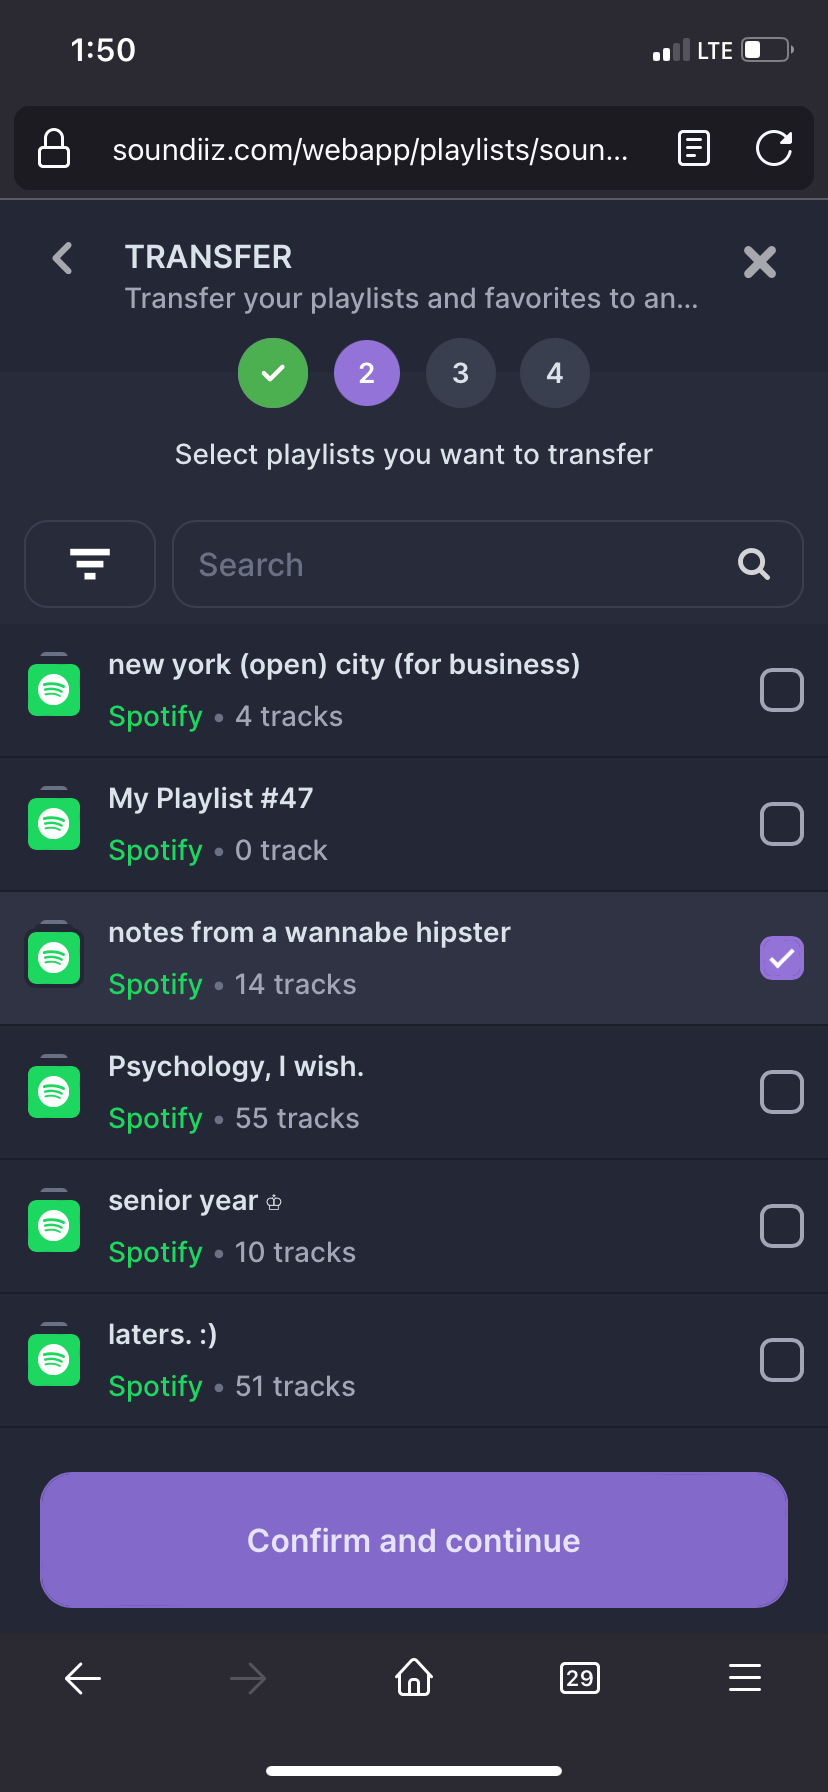 A screenshot of the Spotify playlists available for transfer.